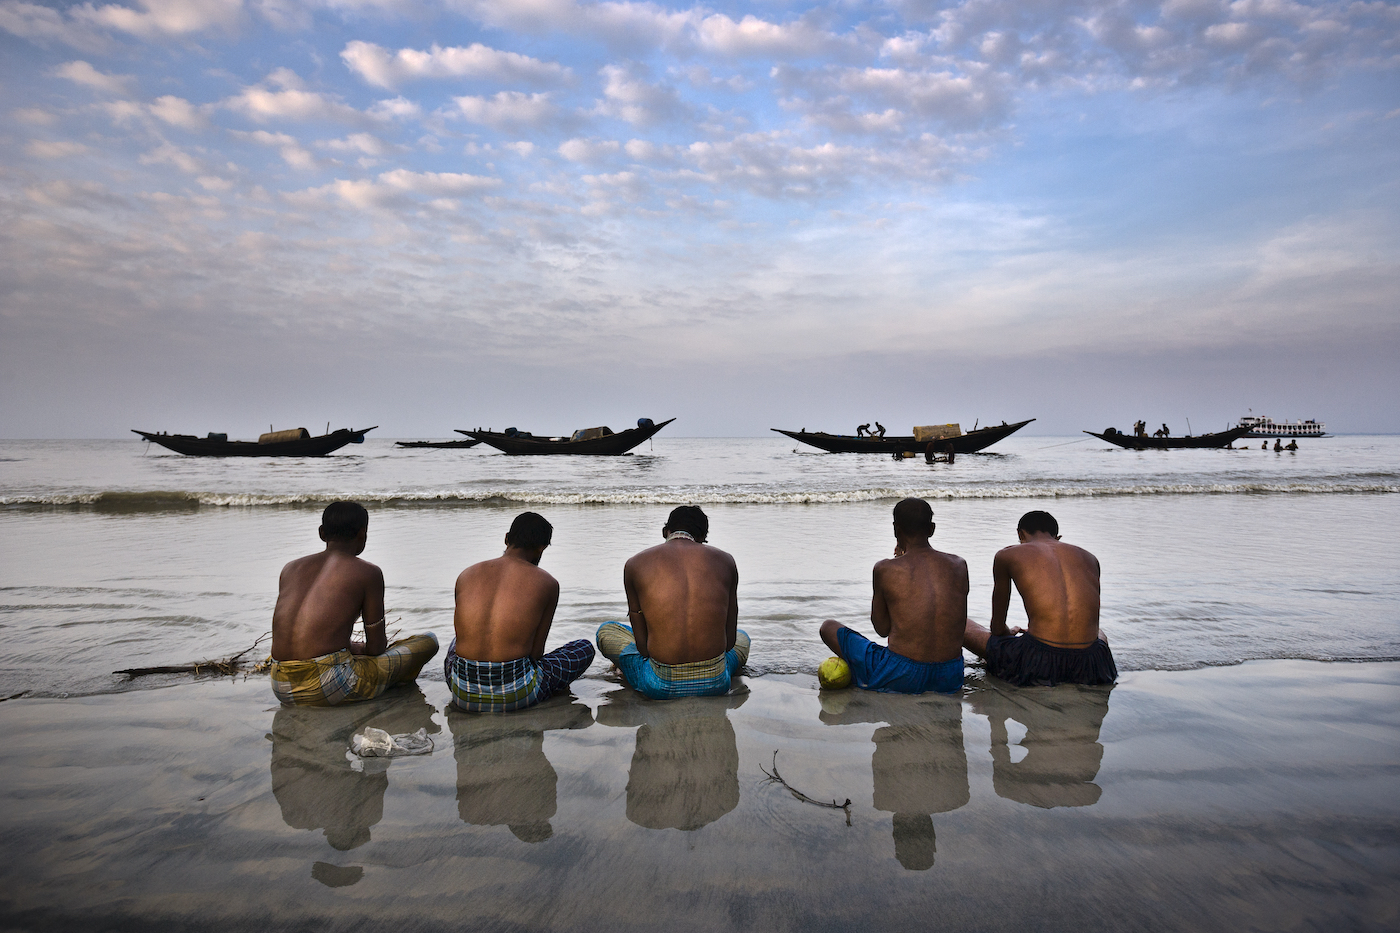 Rodney Dekker / Climate Visuals  Five fishermen pray for a benevolent sea in Dublar, Bangladesh, one year after Cyclone Sidr hit the region. On November 15th, 2007, one of the strongest cyclones ever to hit the country slammed into the remote island of Dublar, killing thousands of fishermen out at sea. 